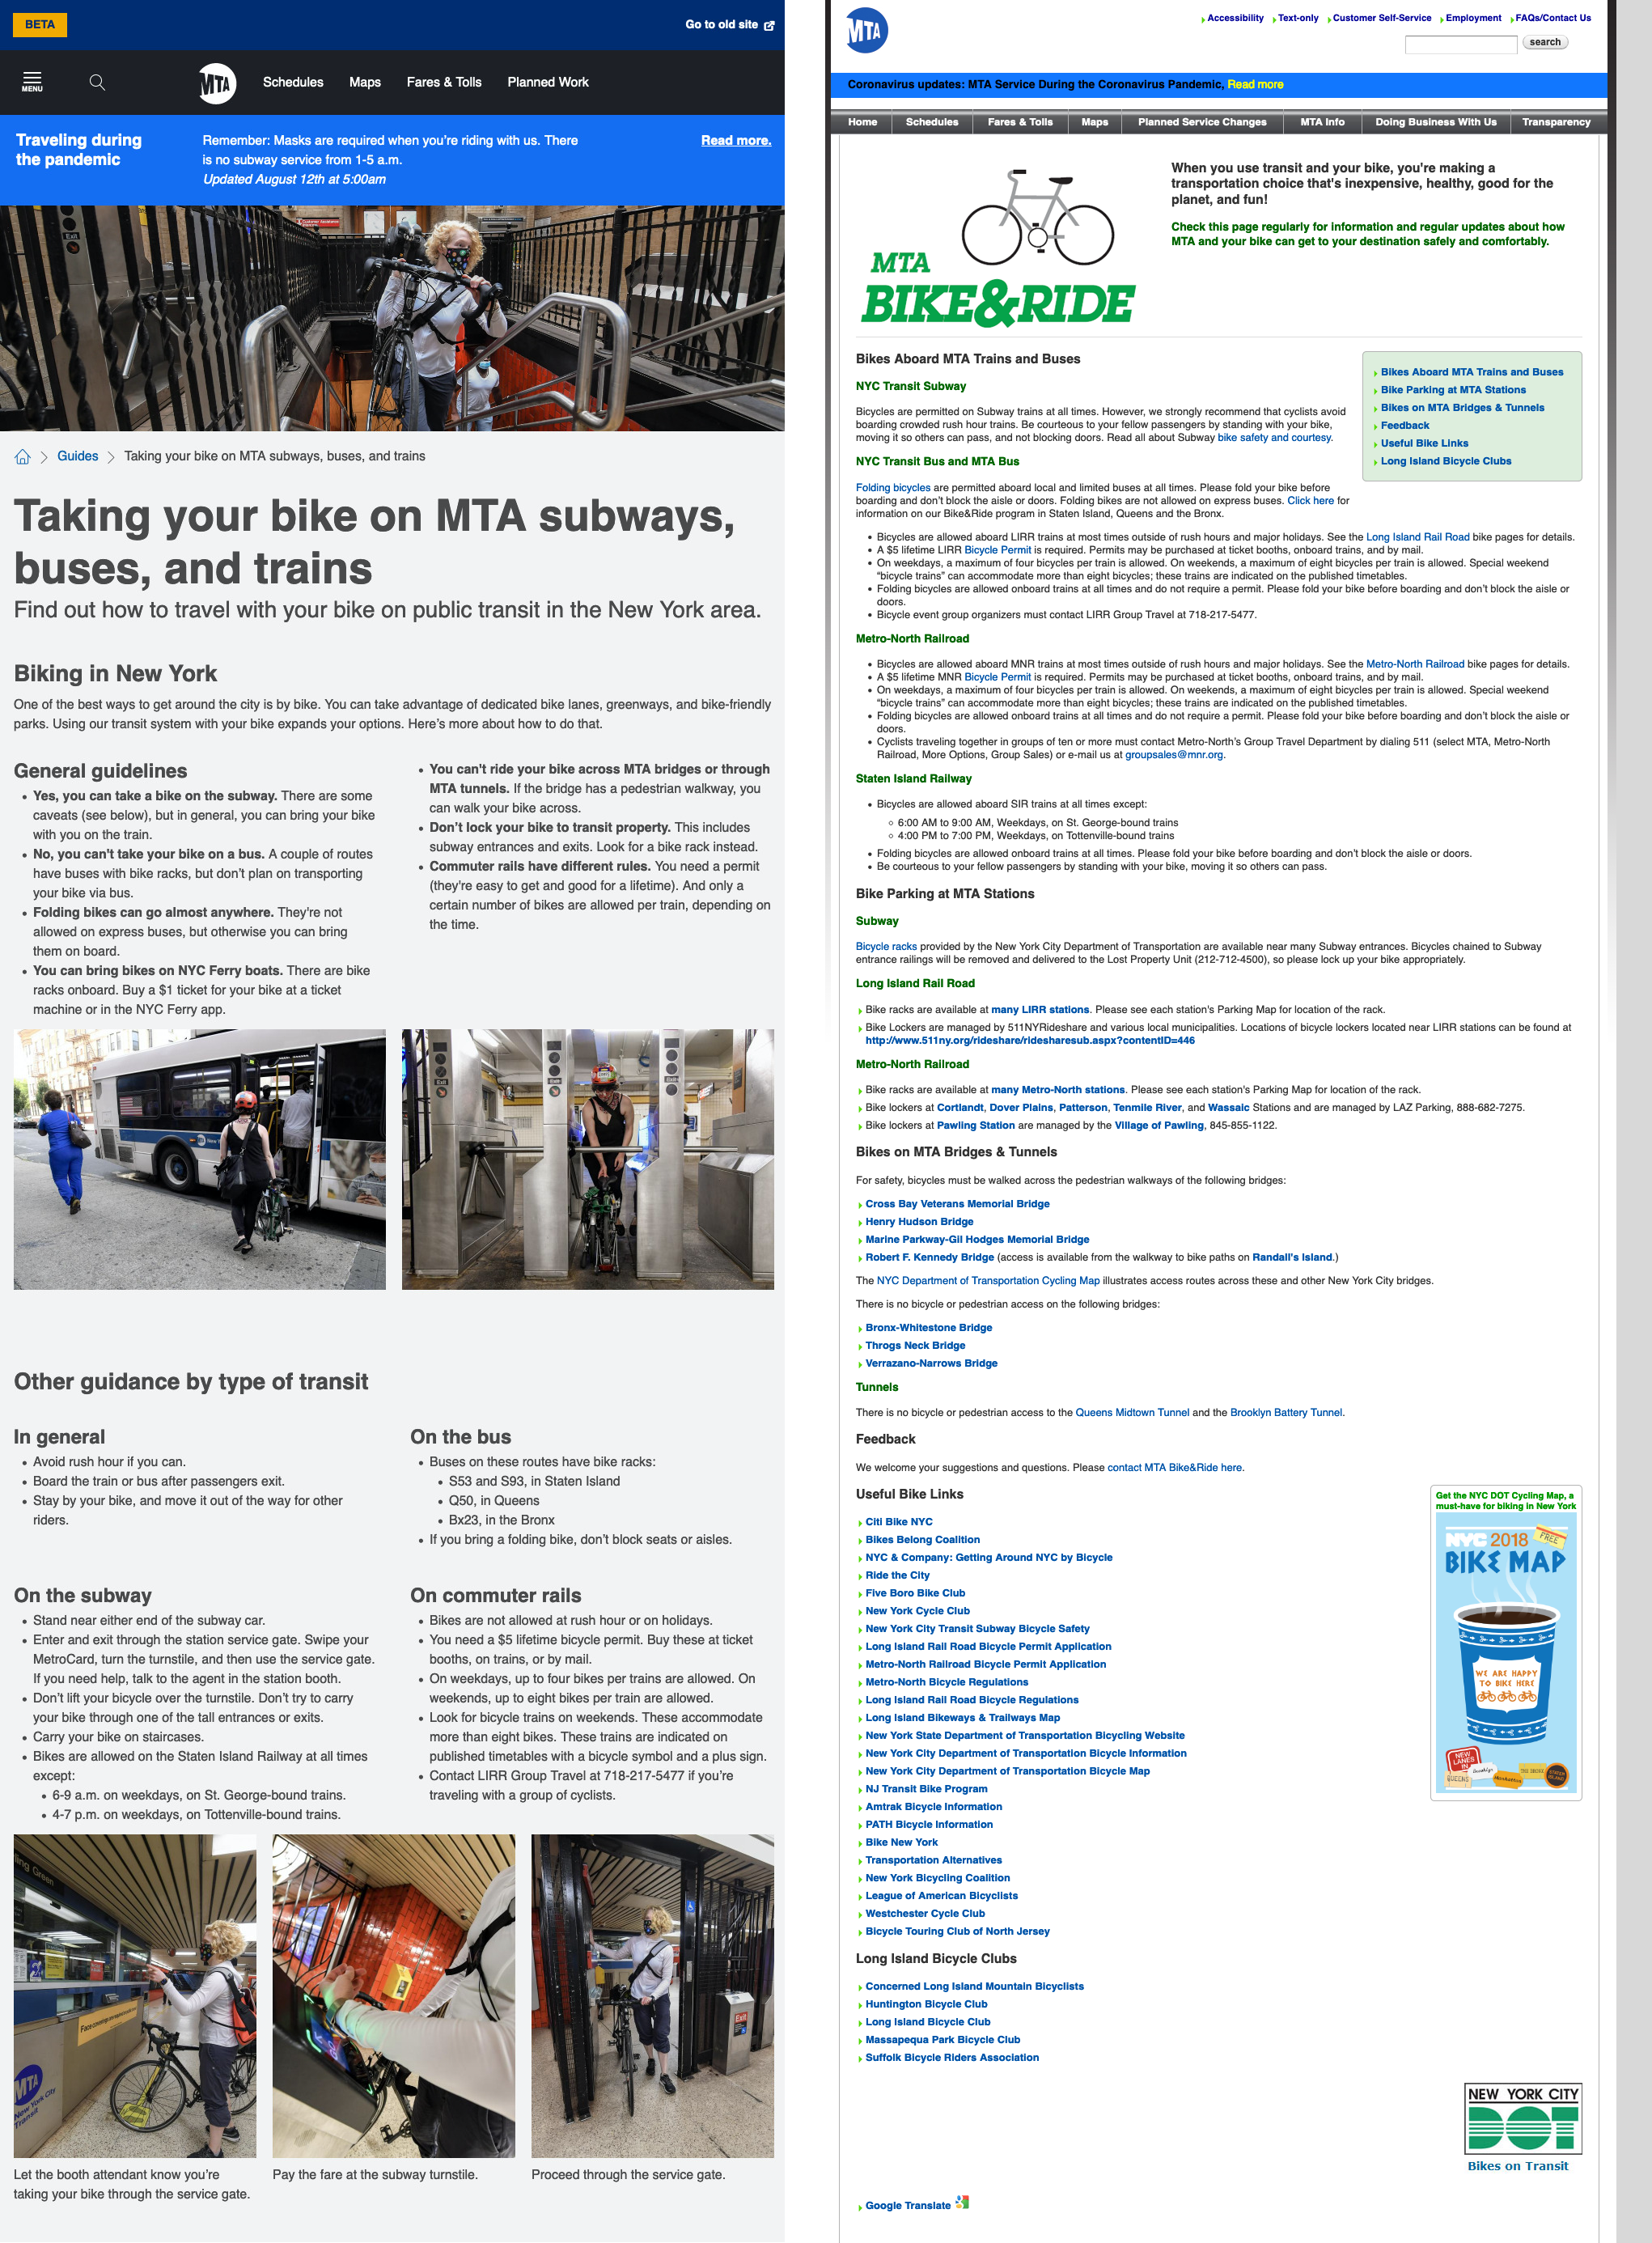 Two screenshots side-by-side, showing a web page with large photos and organized text, compared to an outdated-looking page that’s mostly text.